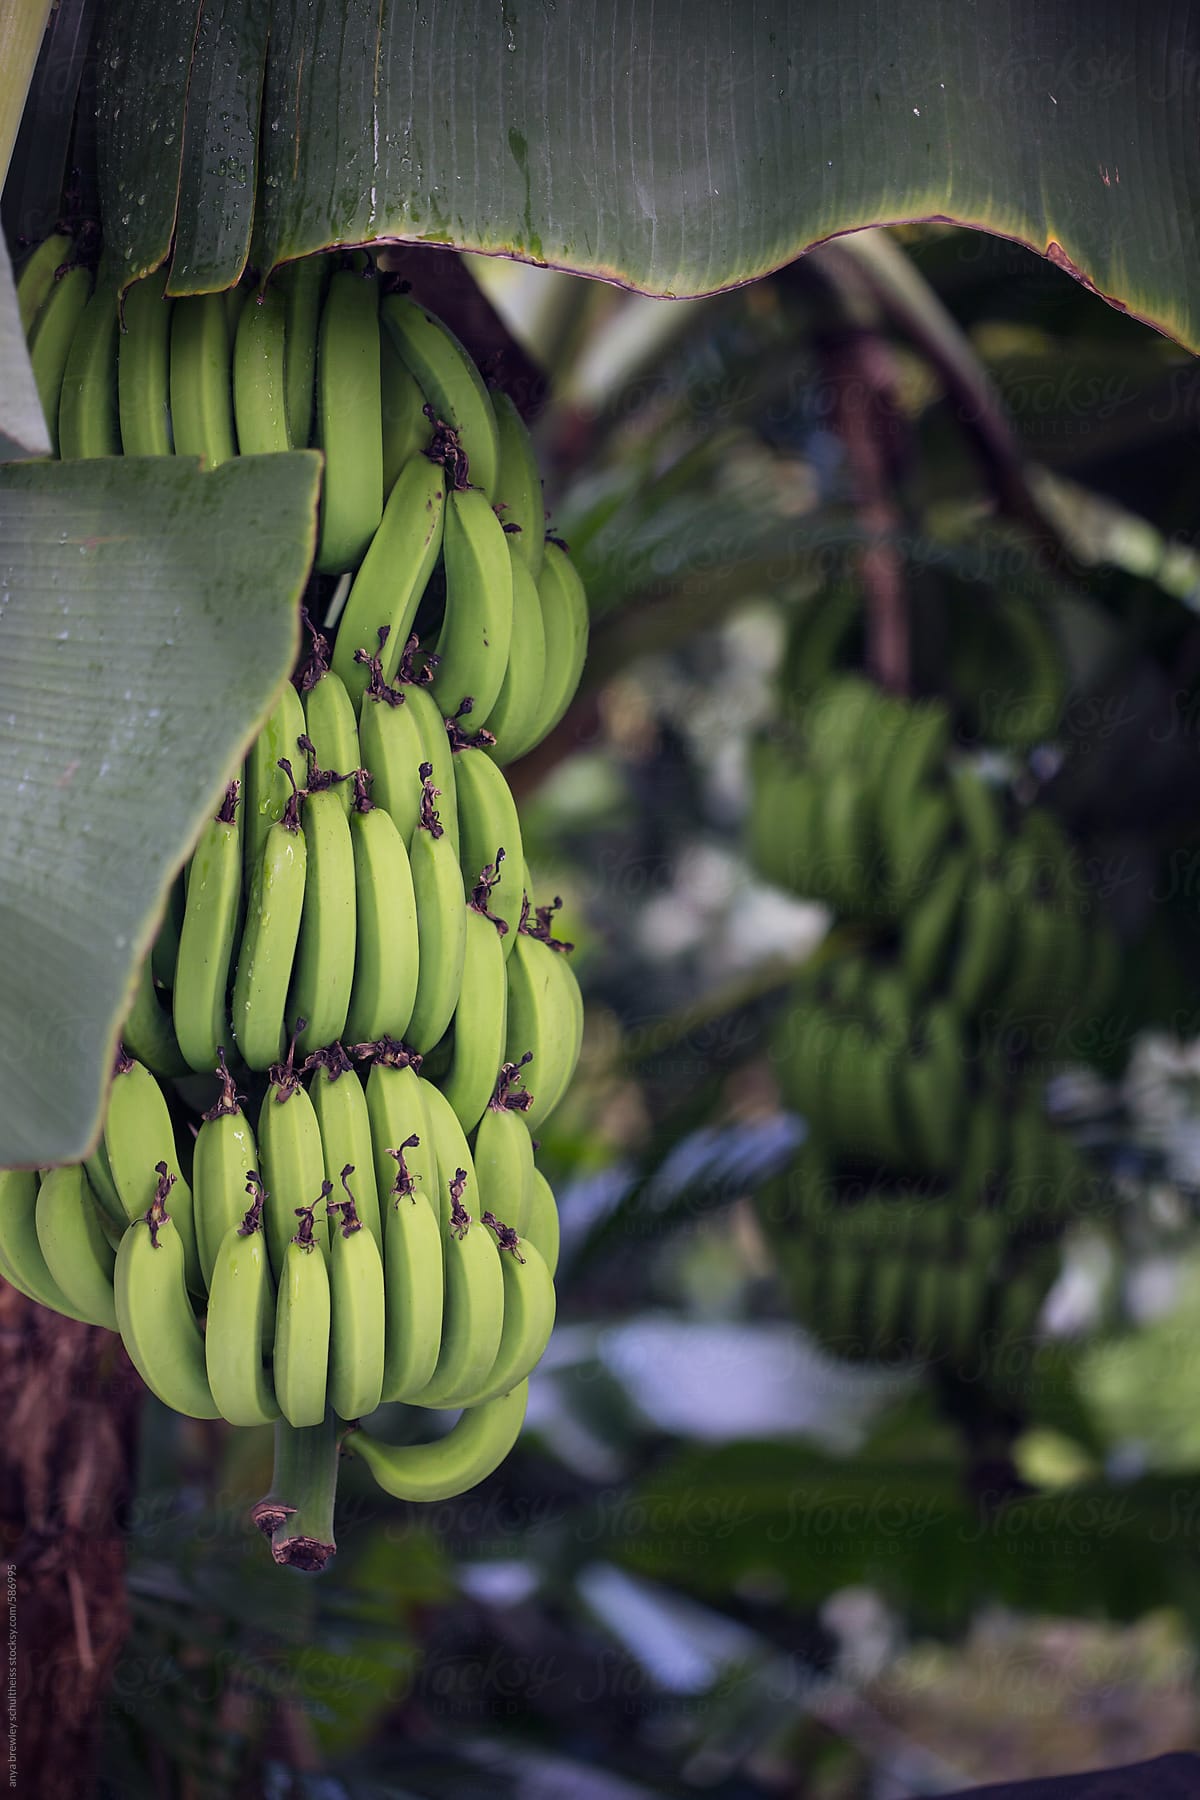 Two bunches of green bananas growing on their trees